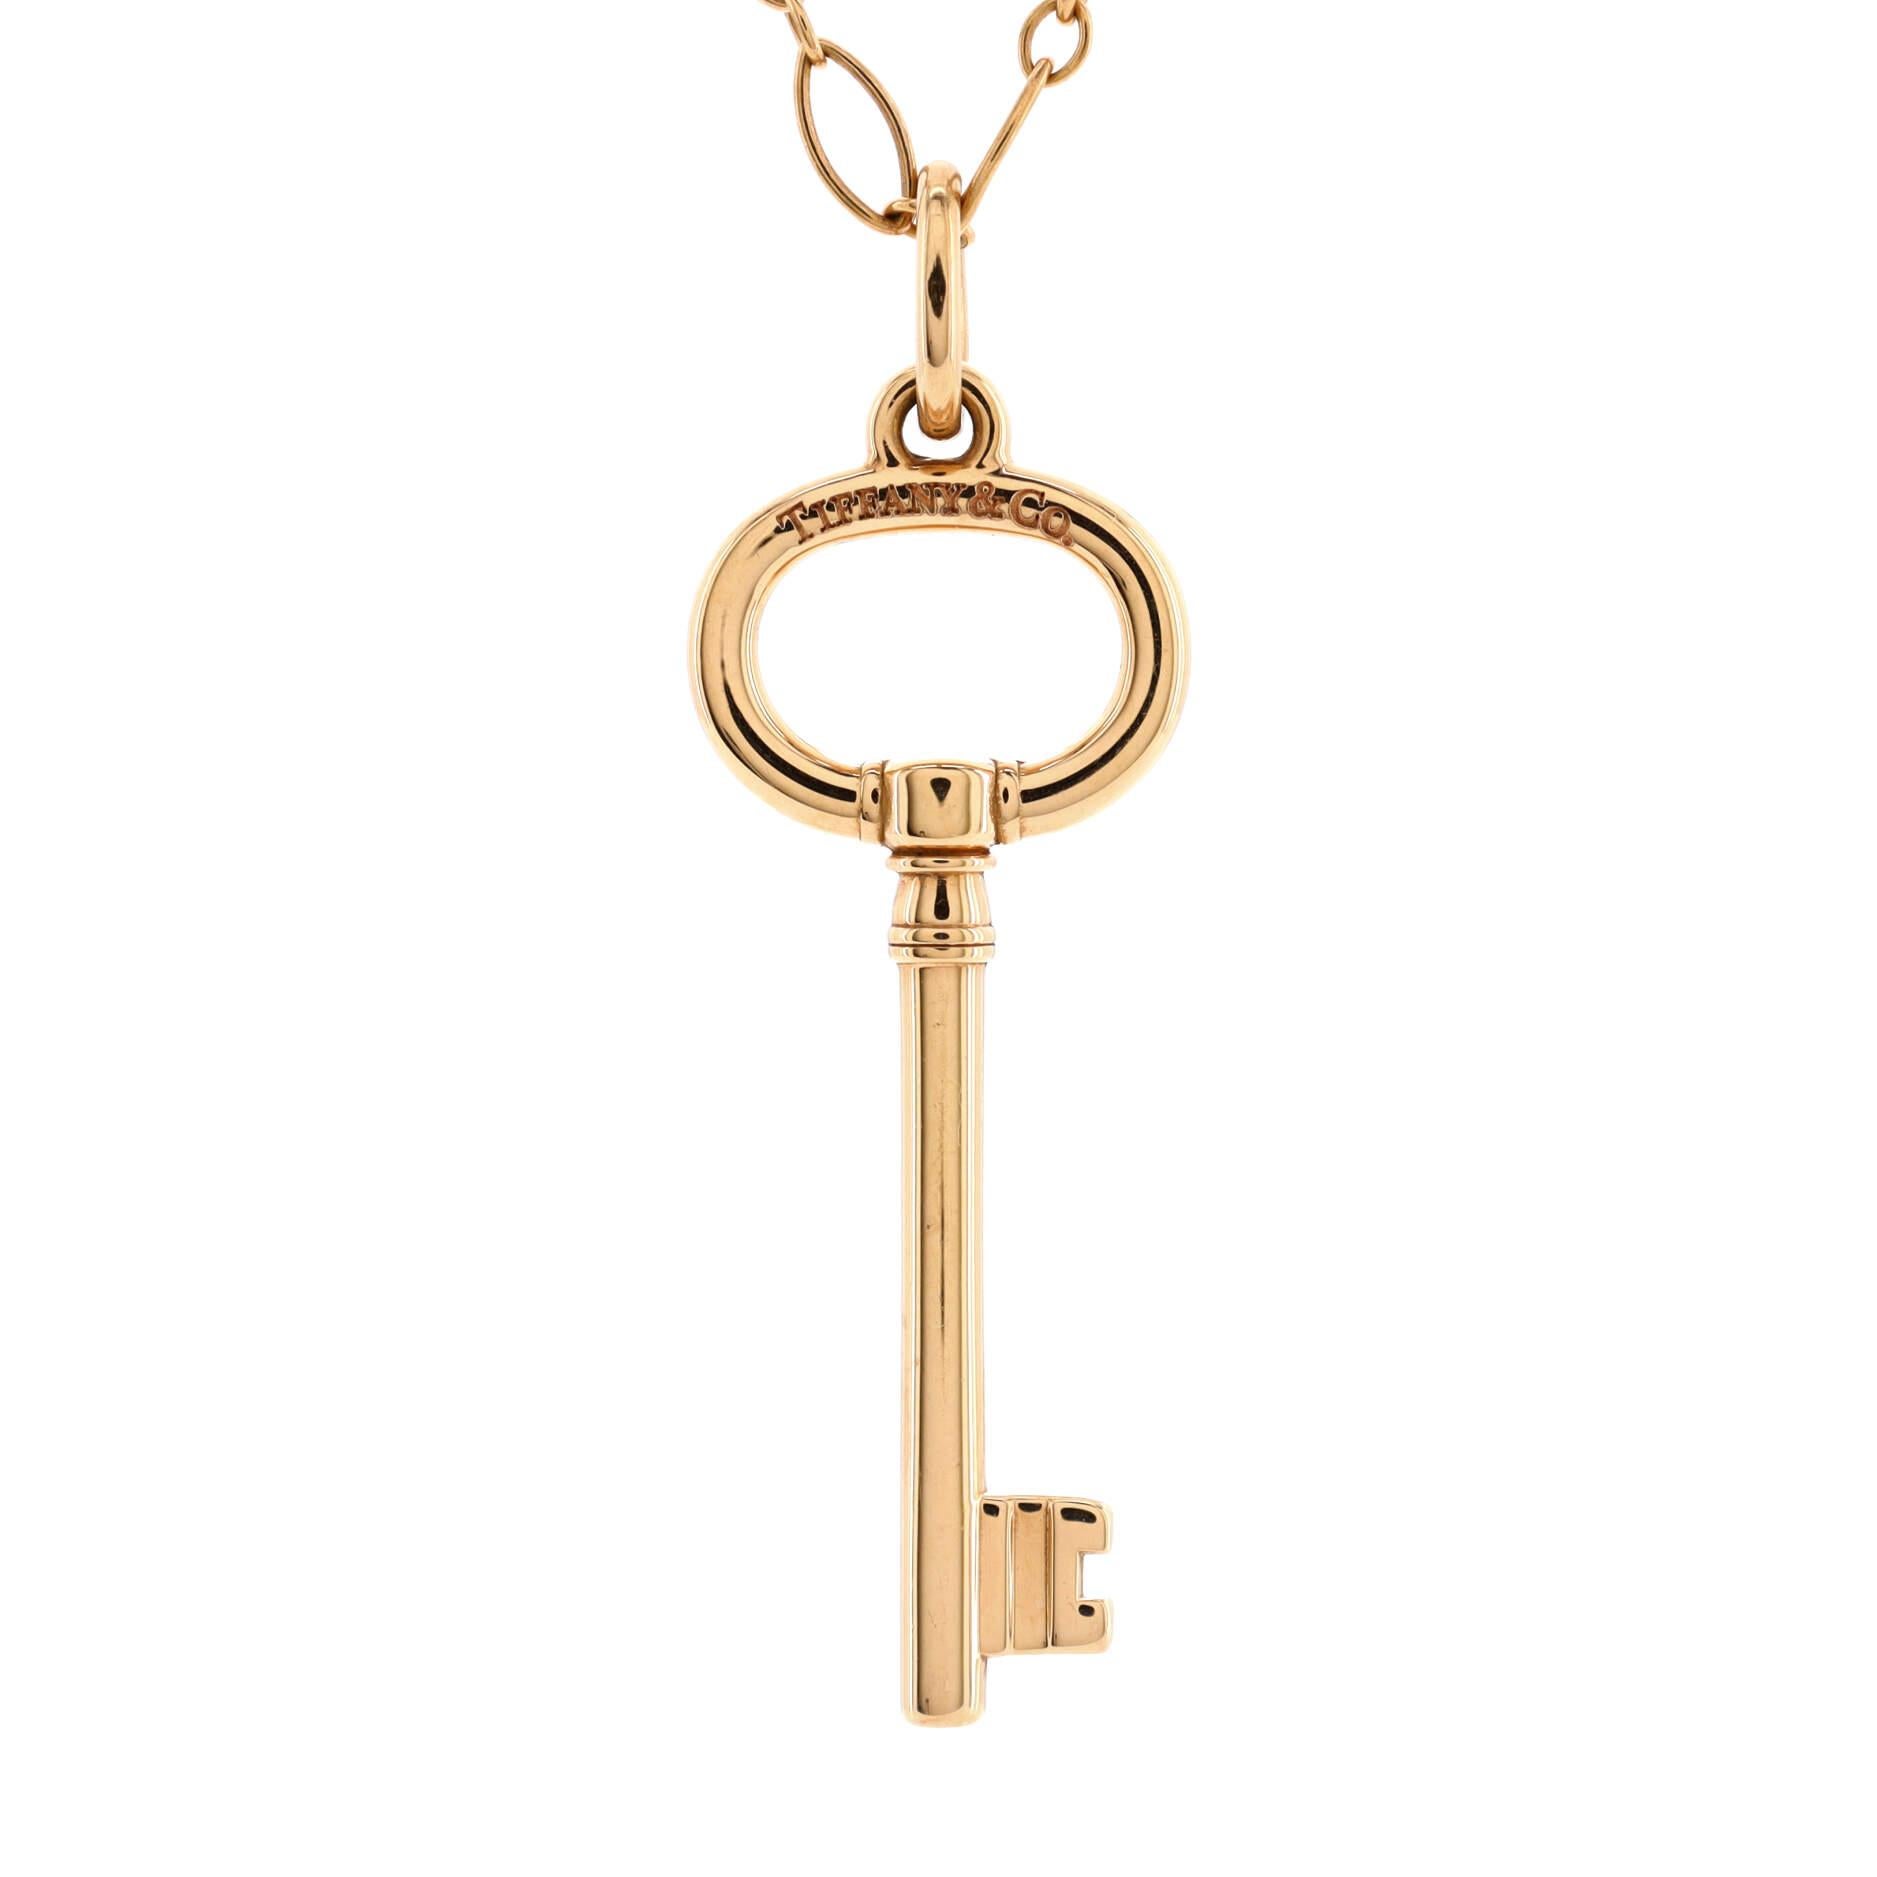 Condition: Great. Minor wear throughout.
Accessories: No Accessories
Measurements: Pendant Length: 34.40 mm, Pendant Width: 12.65 mm
Designer: Tiffany & Co.
Model: Oval Key Pendant Necklace 18K Yellow Gold Large
Exterior Color: Rose Gold, Yellow